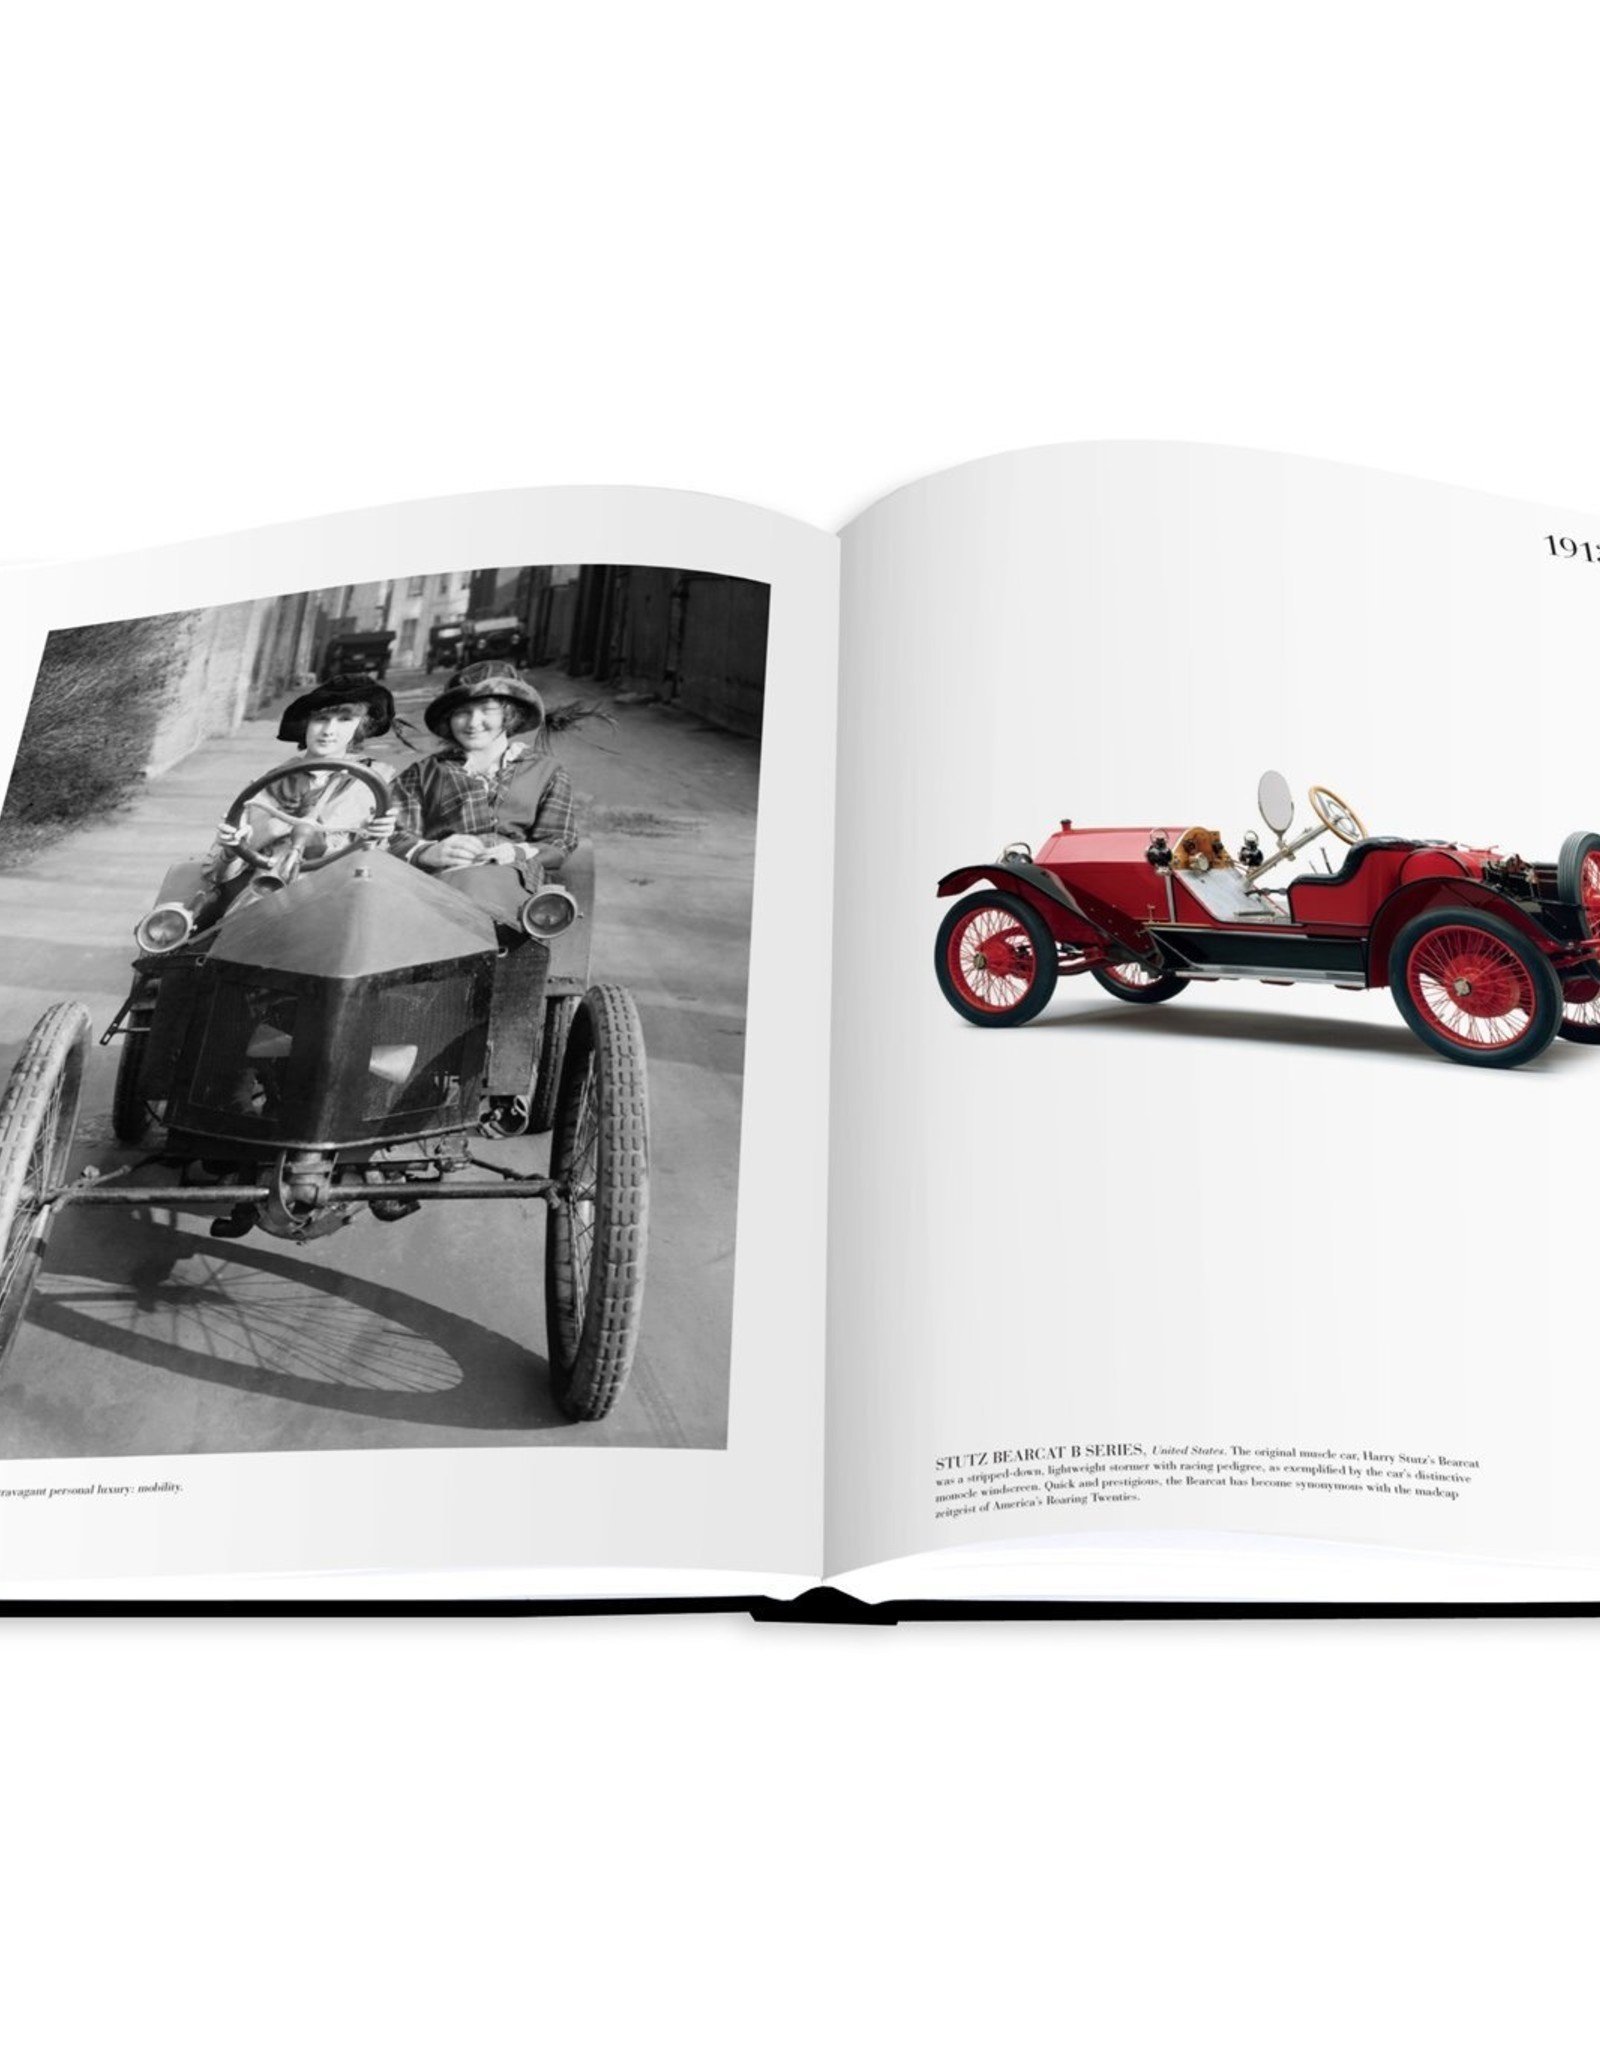 ASSOULINE THE IMPOSSIBLE COLLECTION OF CARS